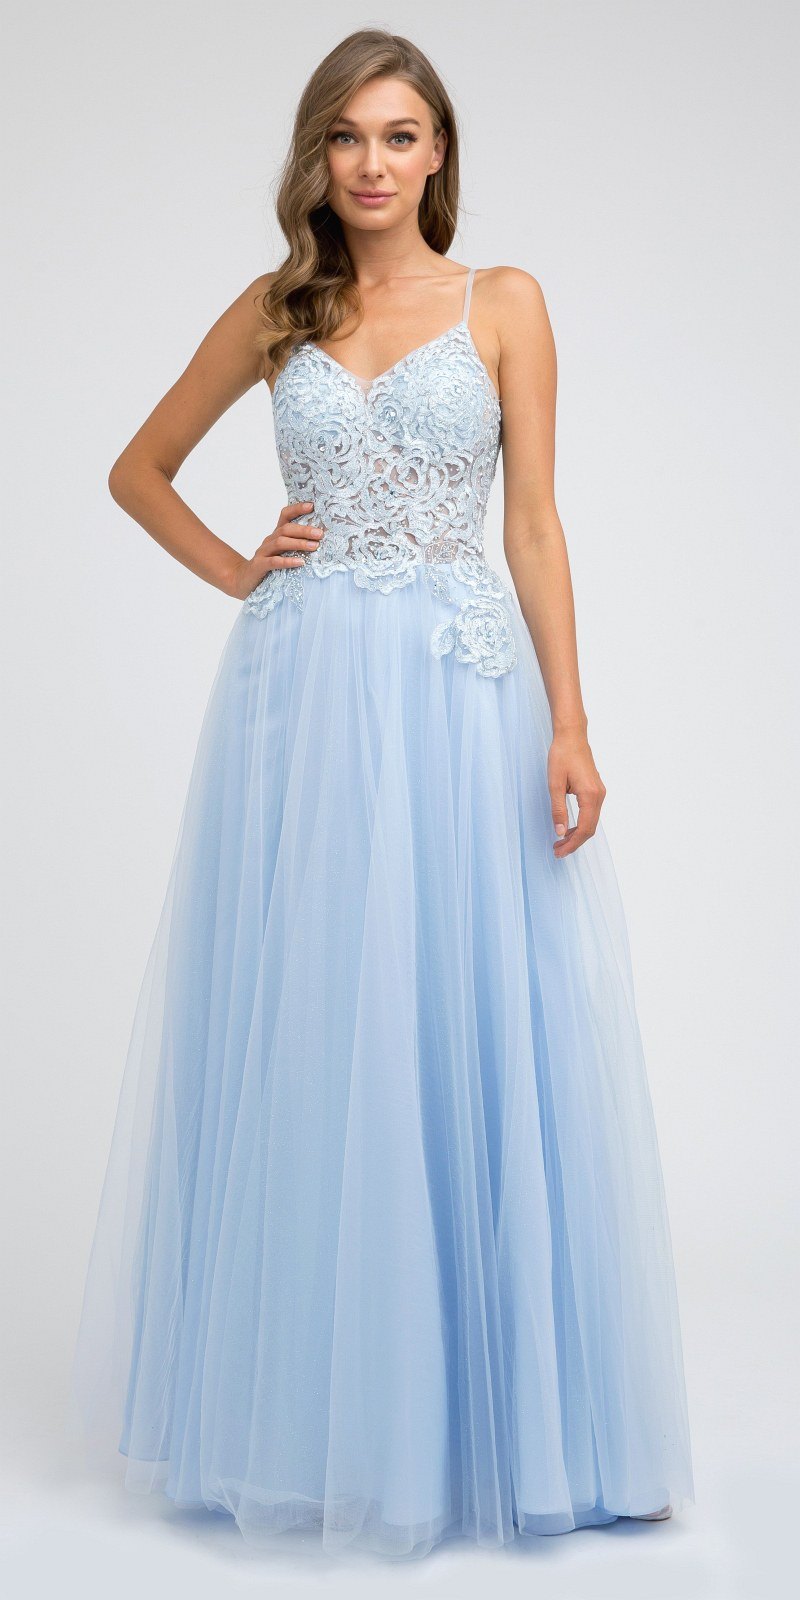 Juliet 212 Appliqued Long Prom Dress A-Line Spaghetti Straps Ice Blue